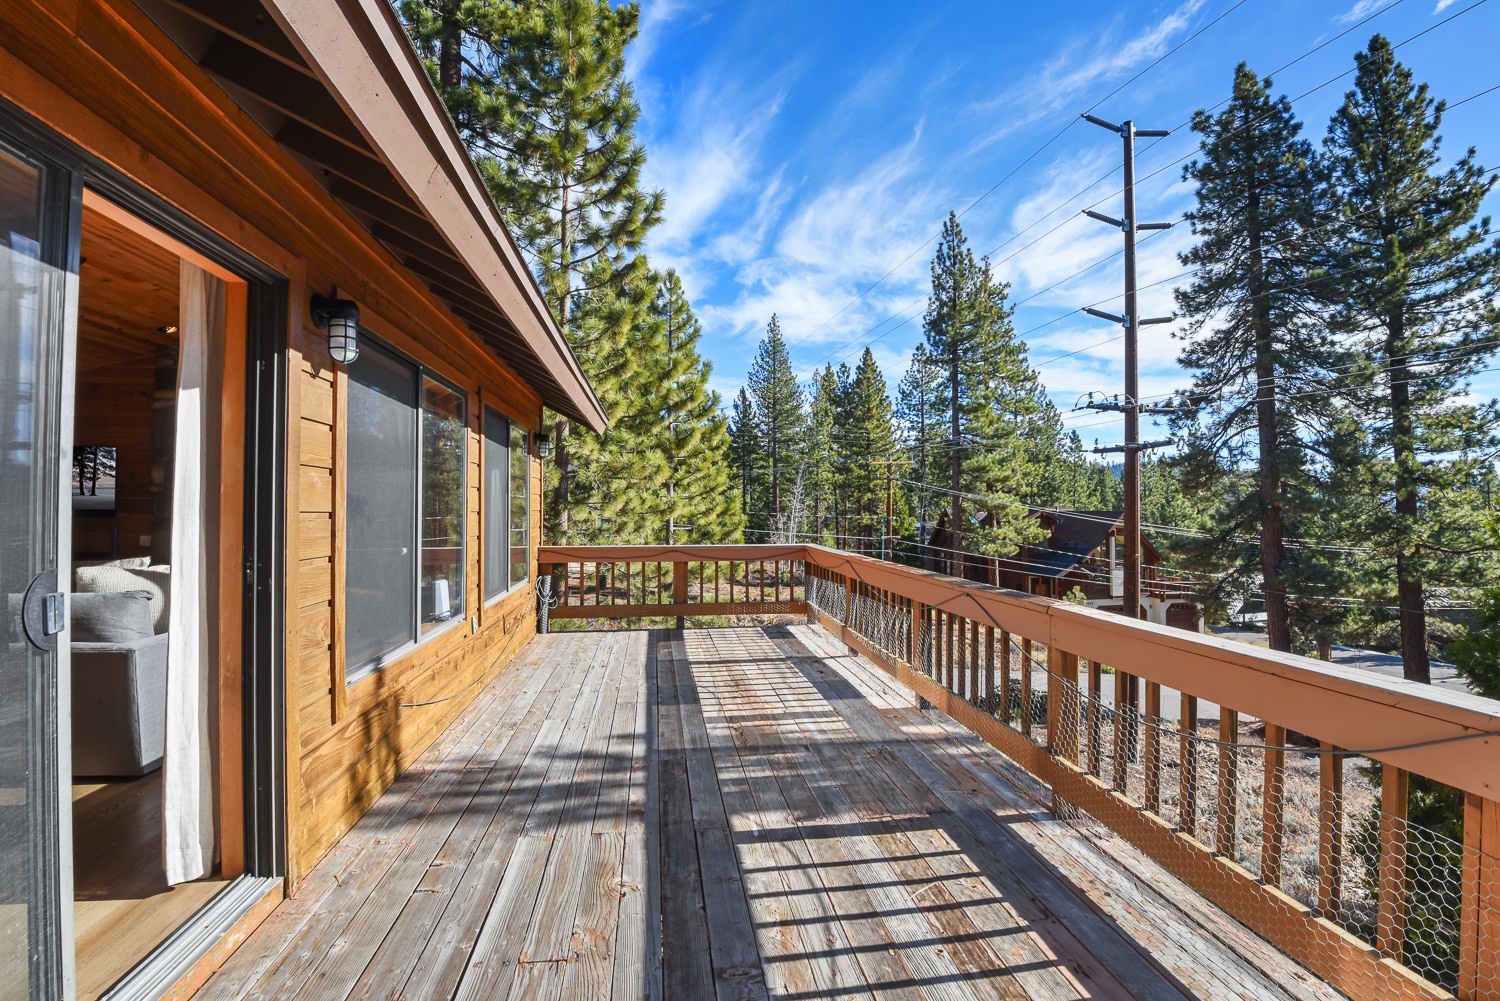 Expansive deck with a breathtaking view